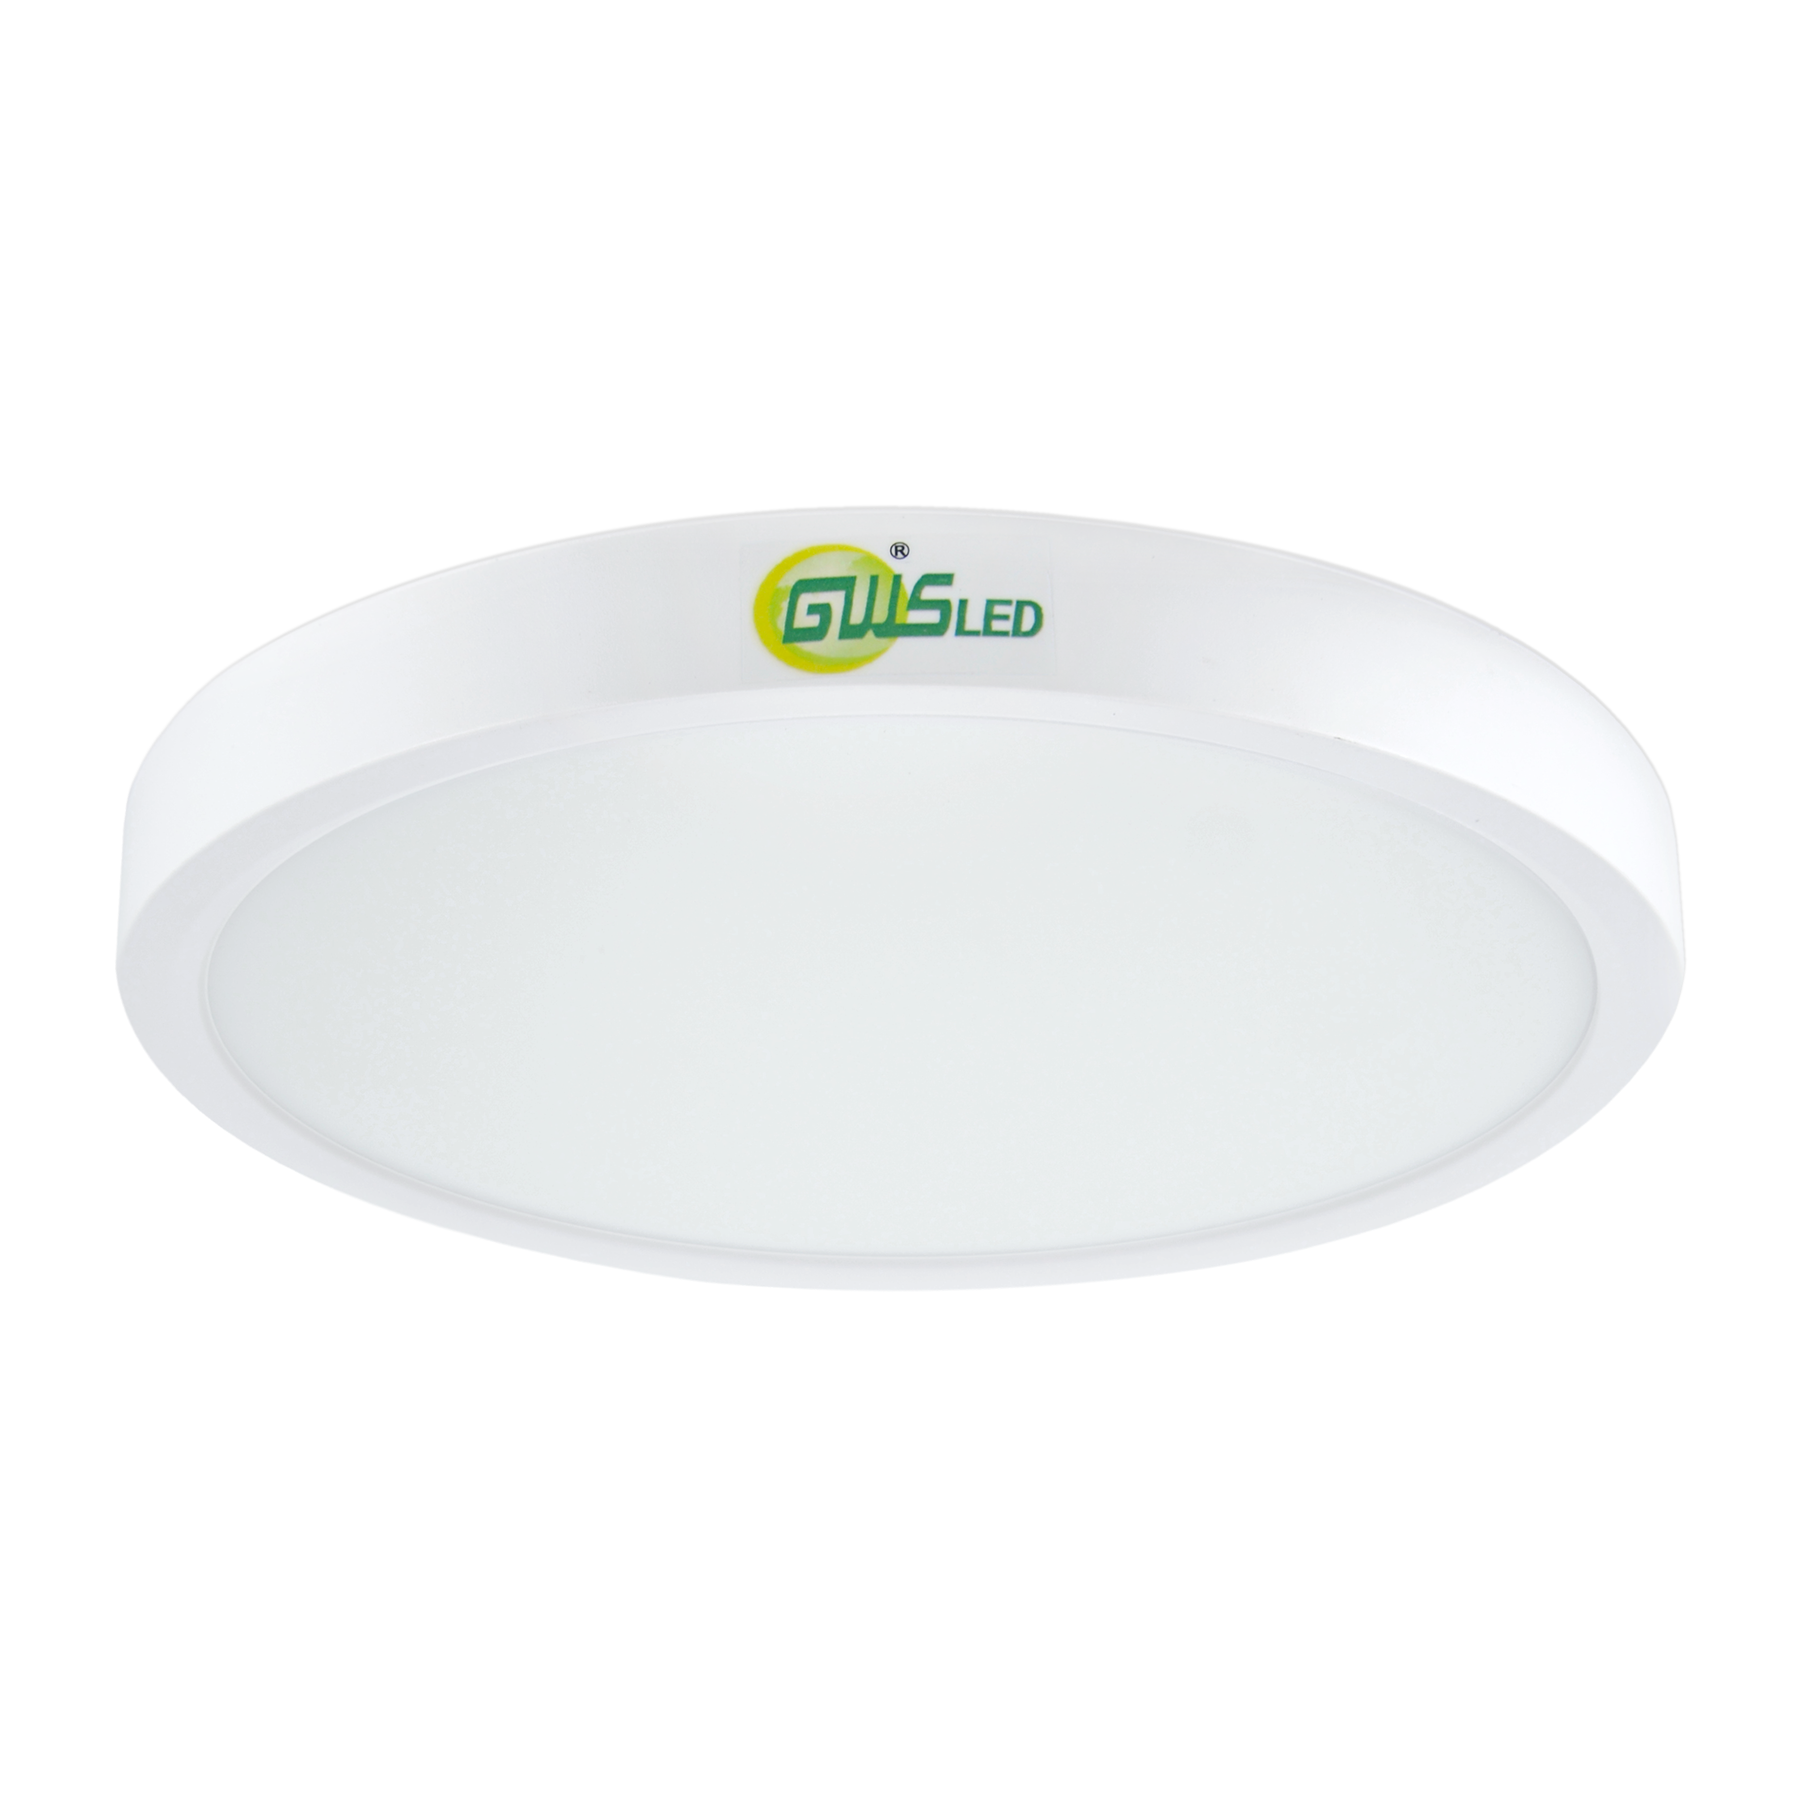 G.W.S LED Wholesale LED Ceiling Lights Slim LED Ceiling Light 3CCT With Remote Control IP20